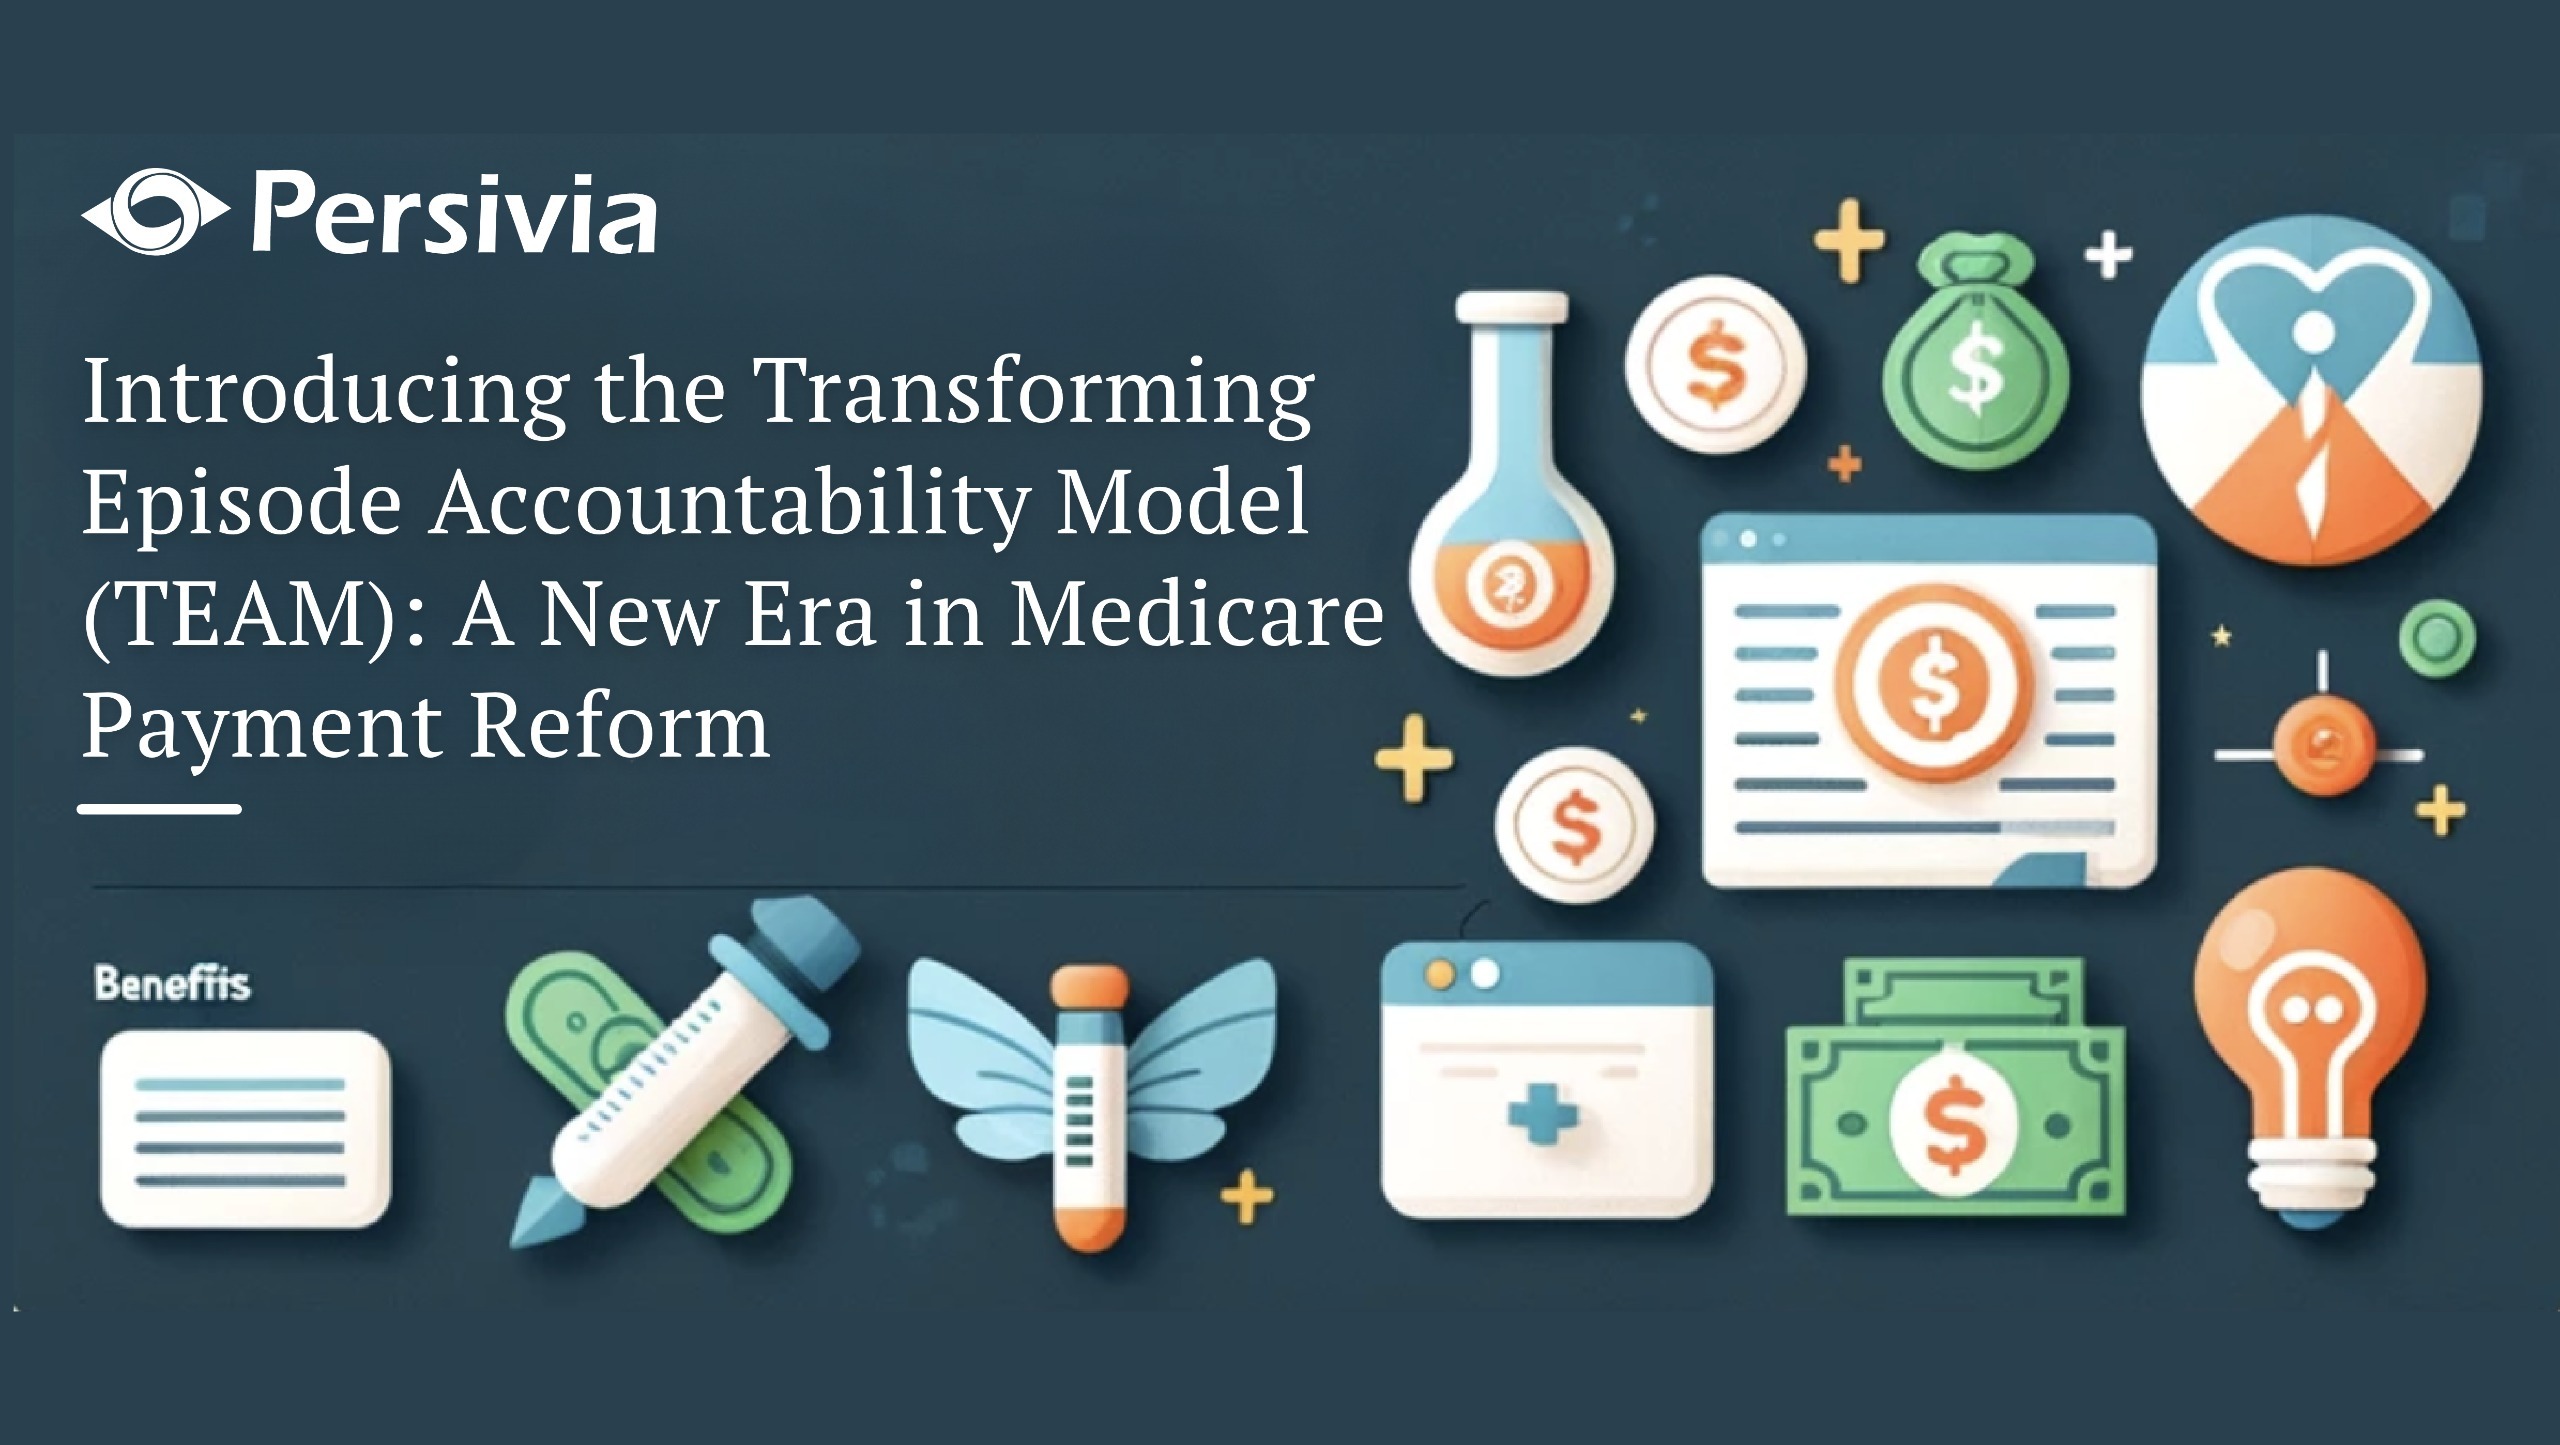 Introducing the Transforming Episode Accountability Model (TEAM): A New Era in Medicare Payment Reform